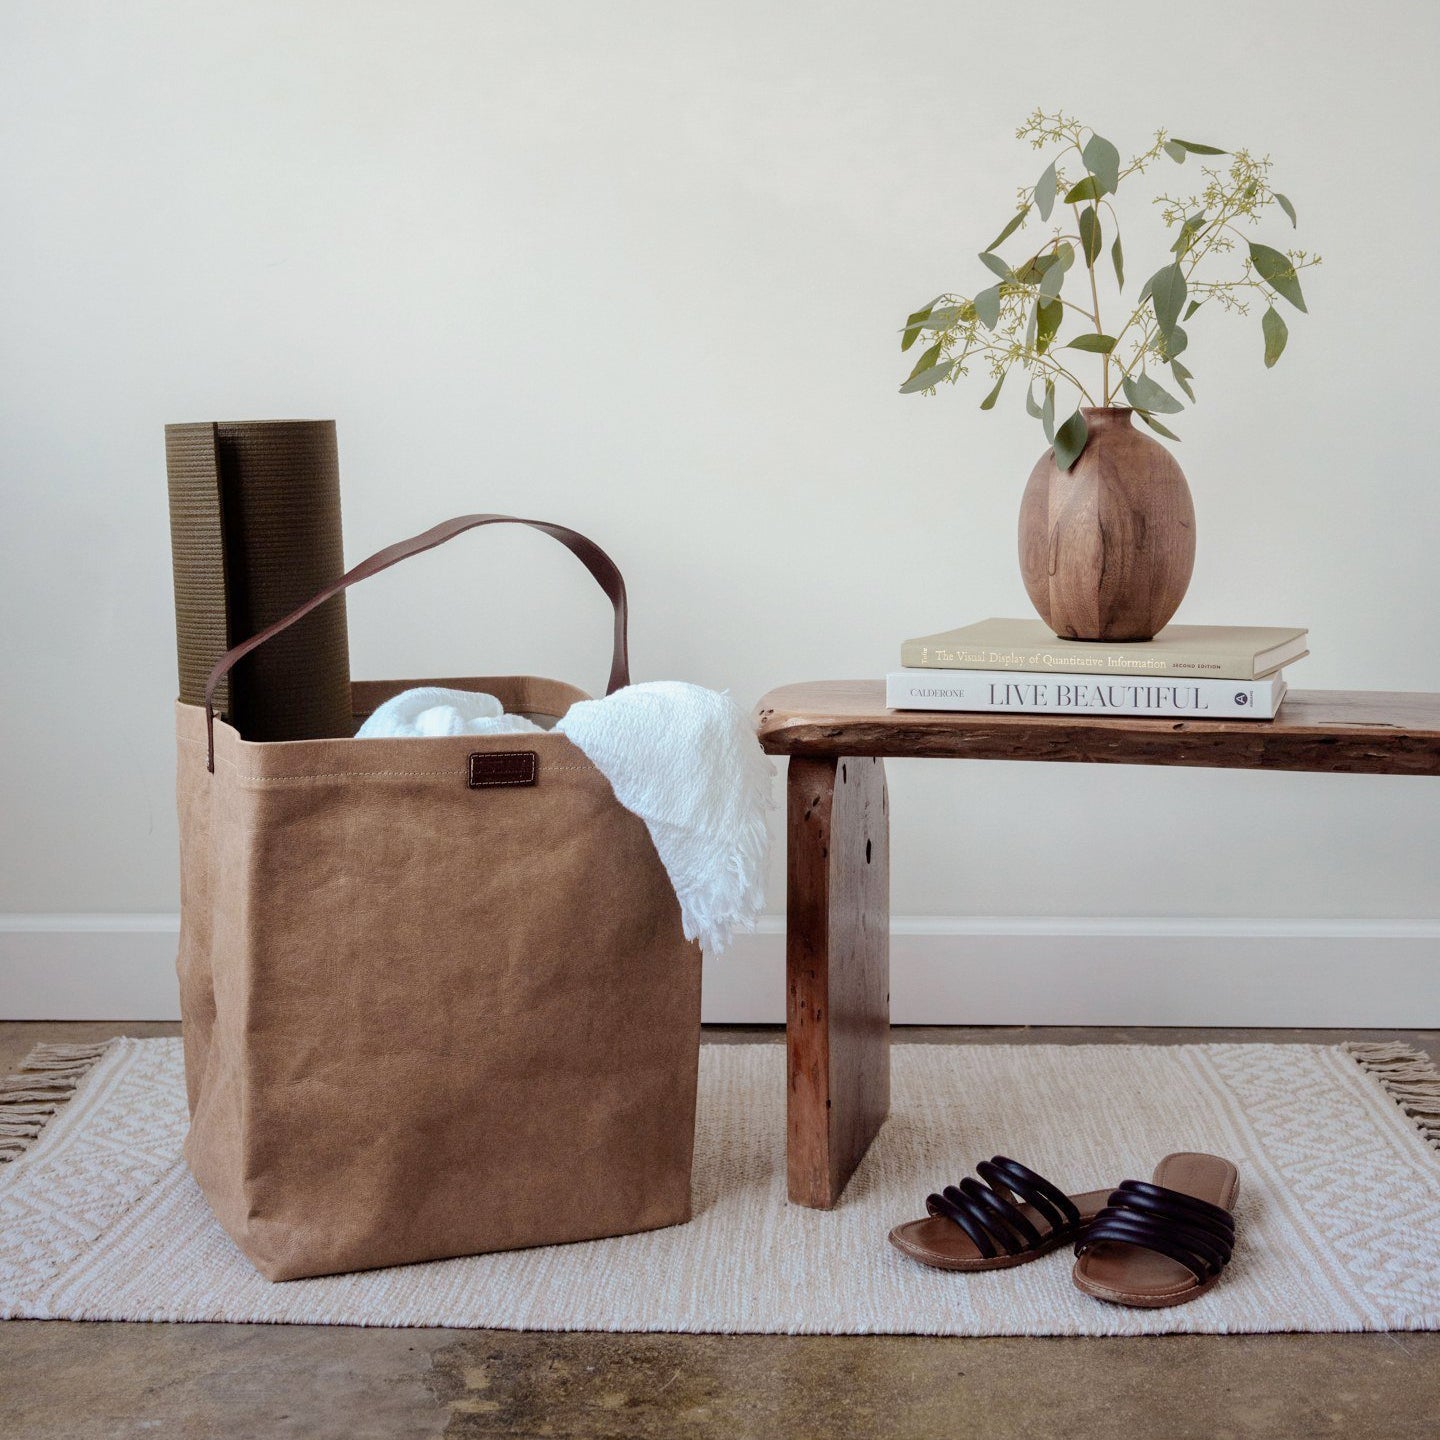 A natural tan washable paper handbag sits in a home setting, containing a towel and a yoga mat. At right sits a wooden bench, a wooden vase containing leaves, and a pair of flat sandals.